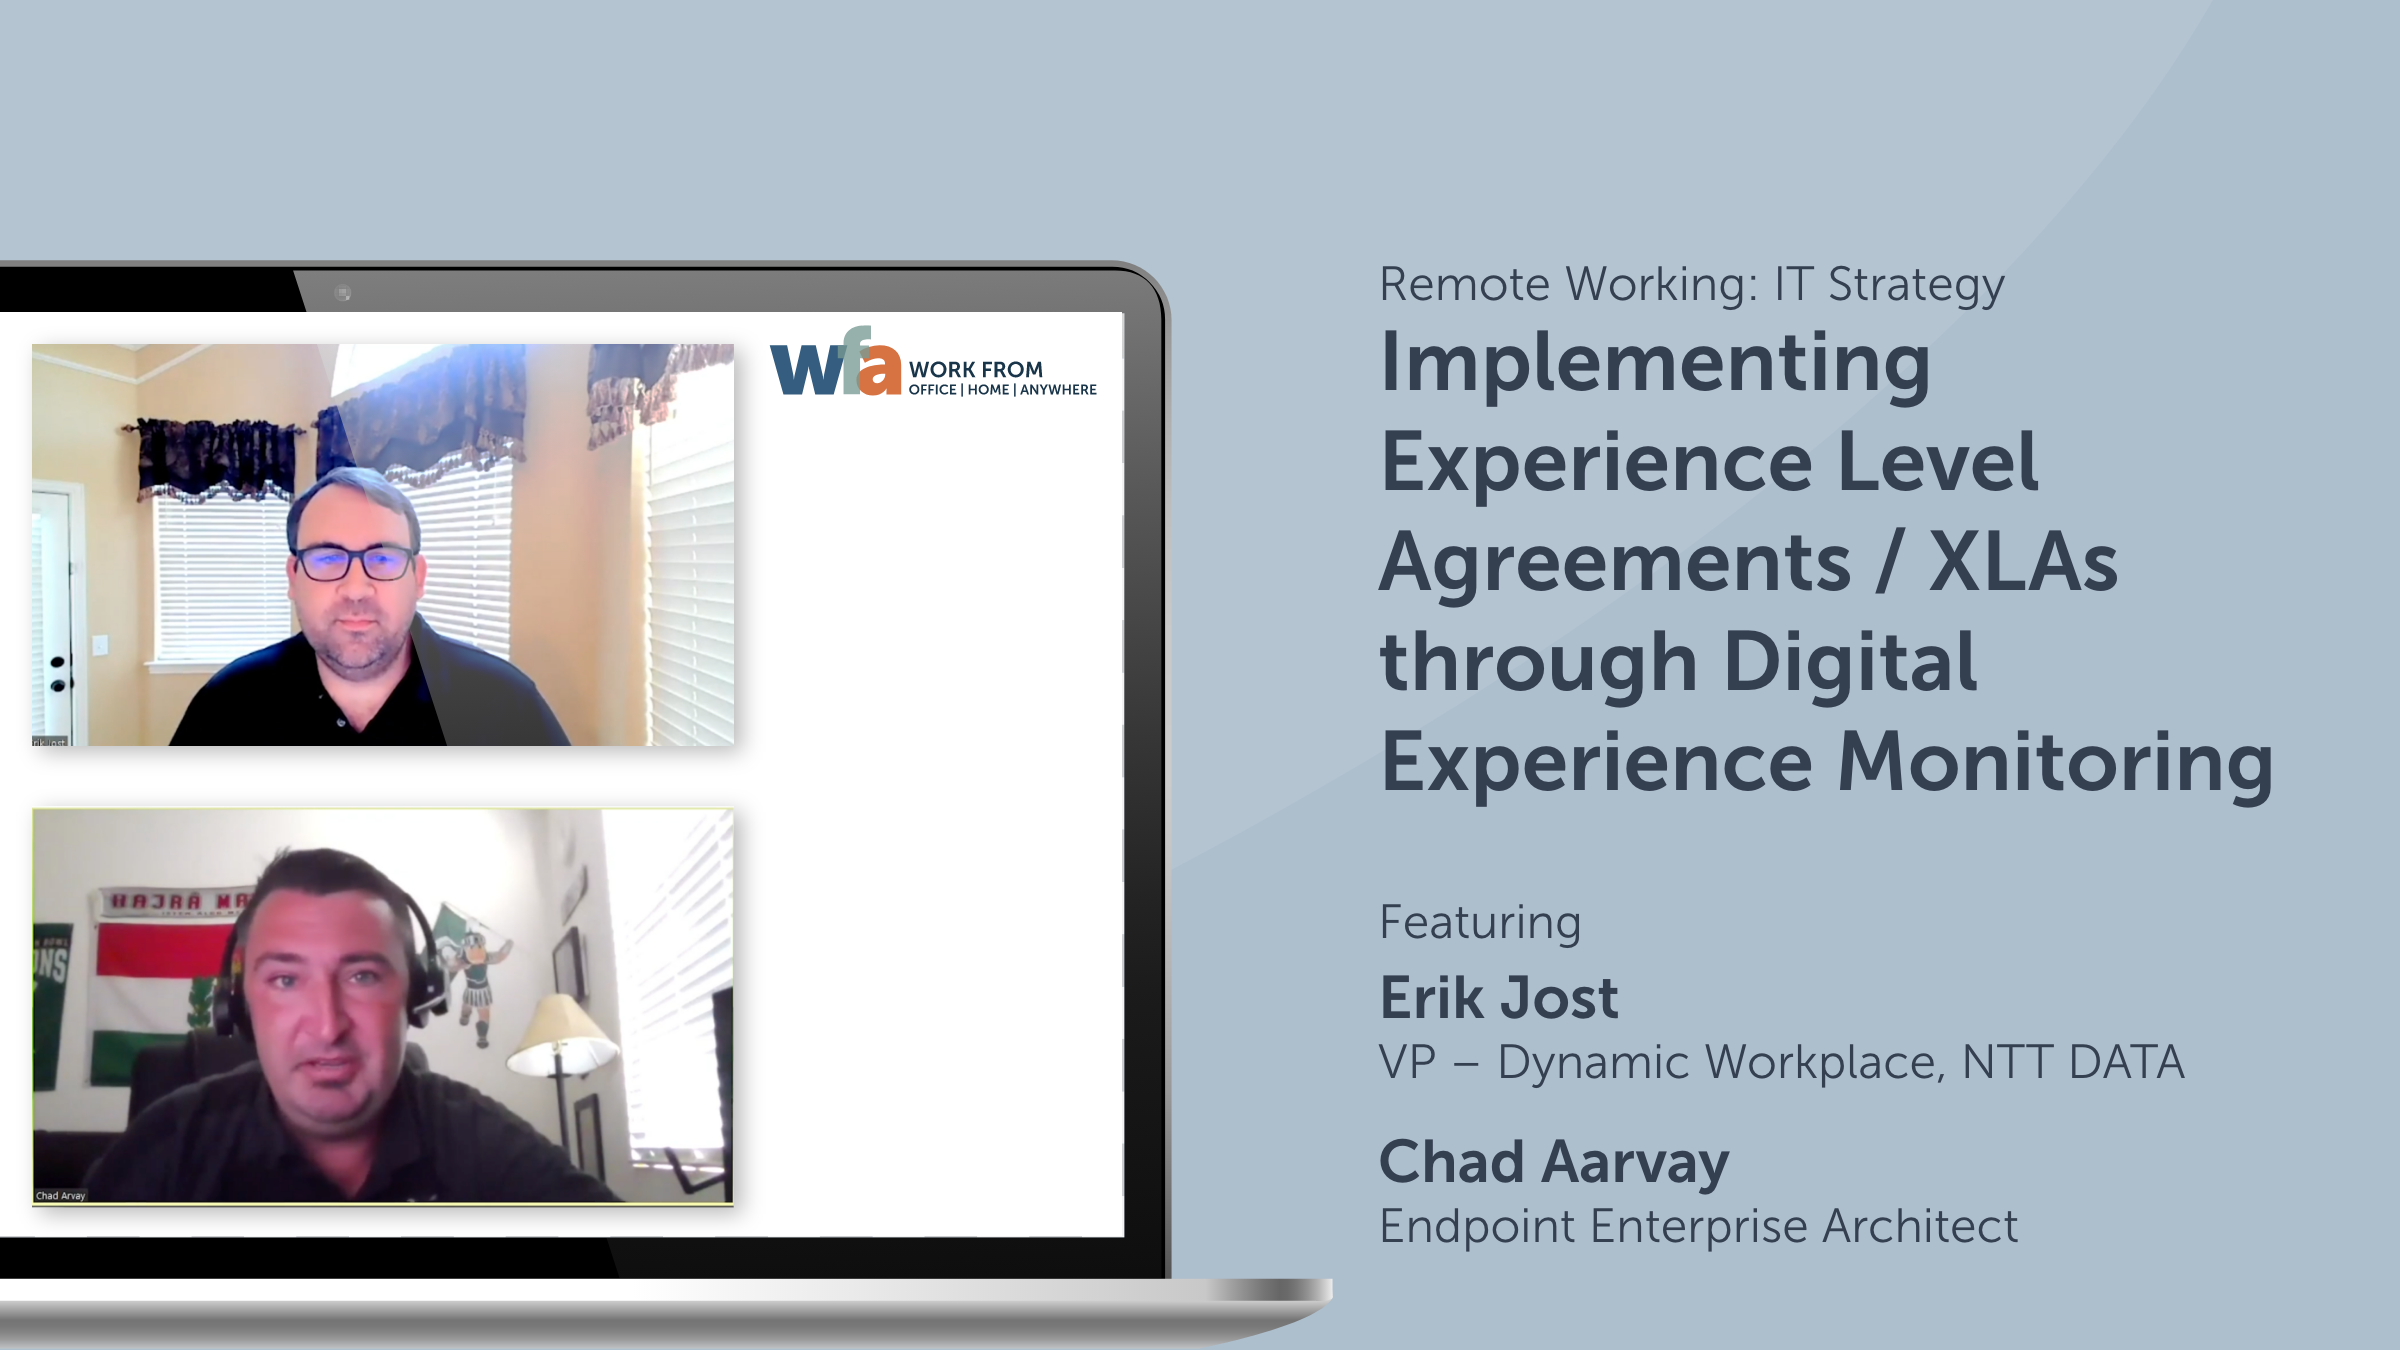 Implementing Experience Level Agreements / XLAs through Digital Experience Monitoring